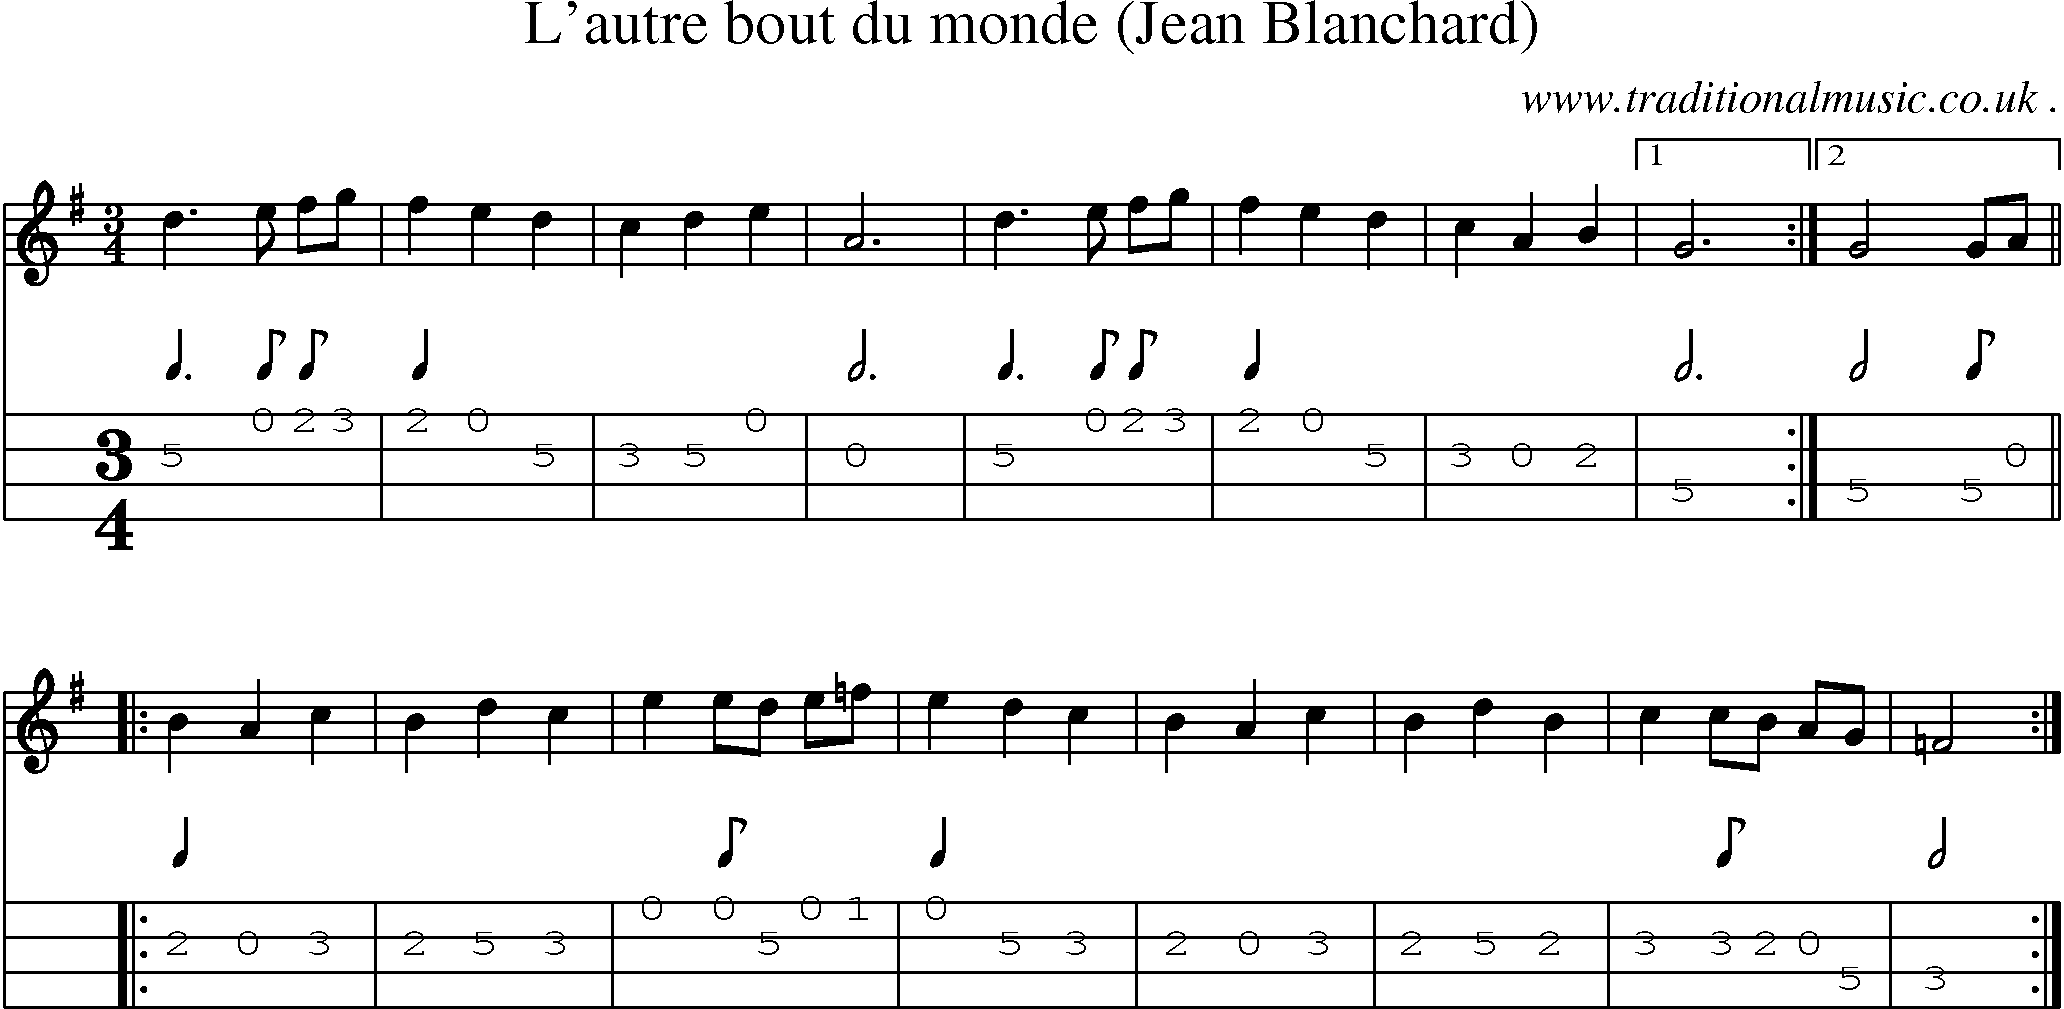 Sheet-Music and Mandolin Tabs for Lautre Bout Du Monde (jean Blanchard)